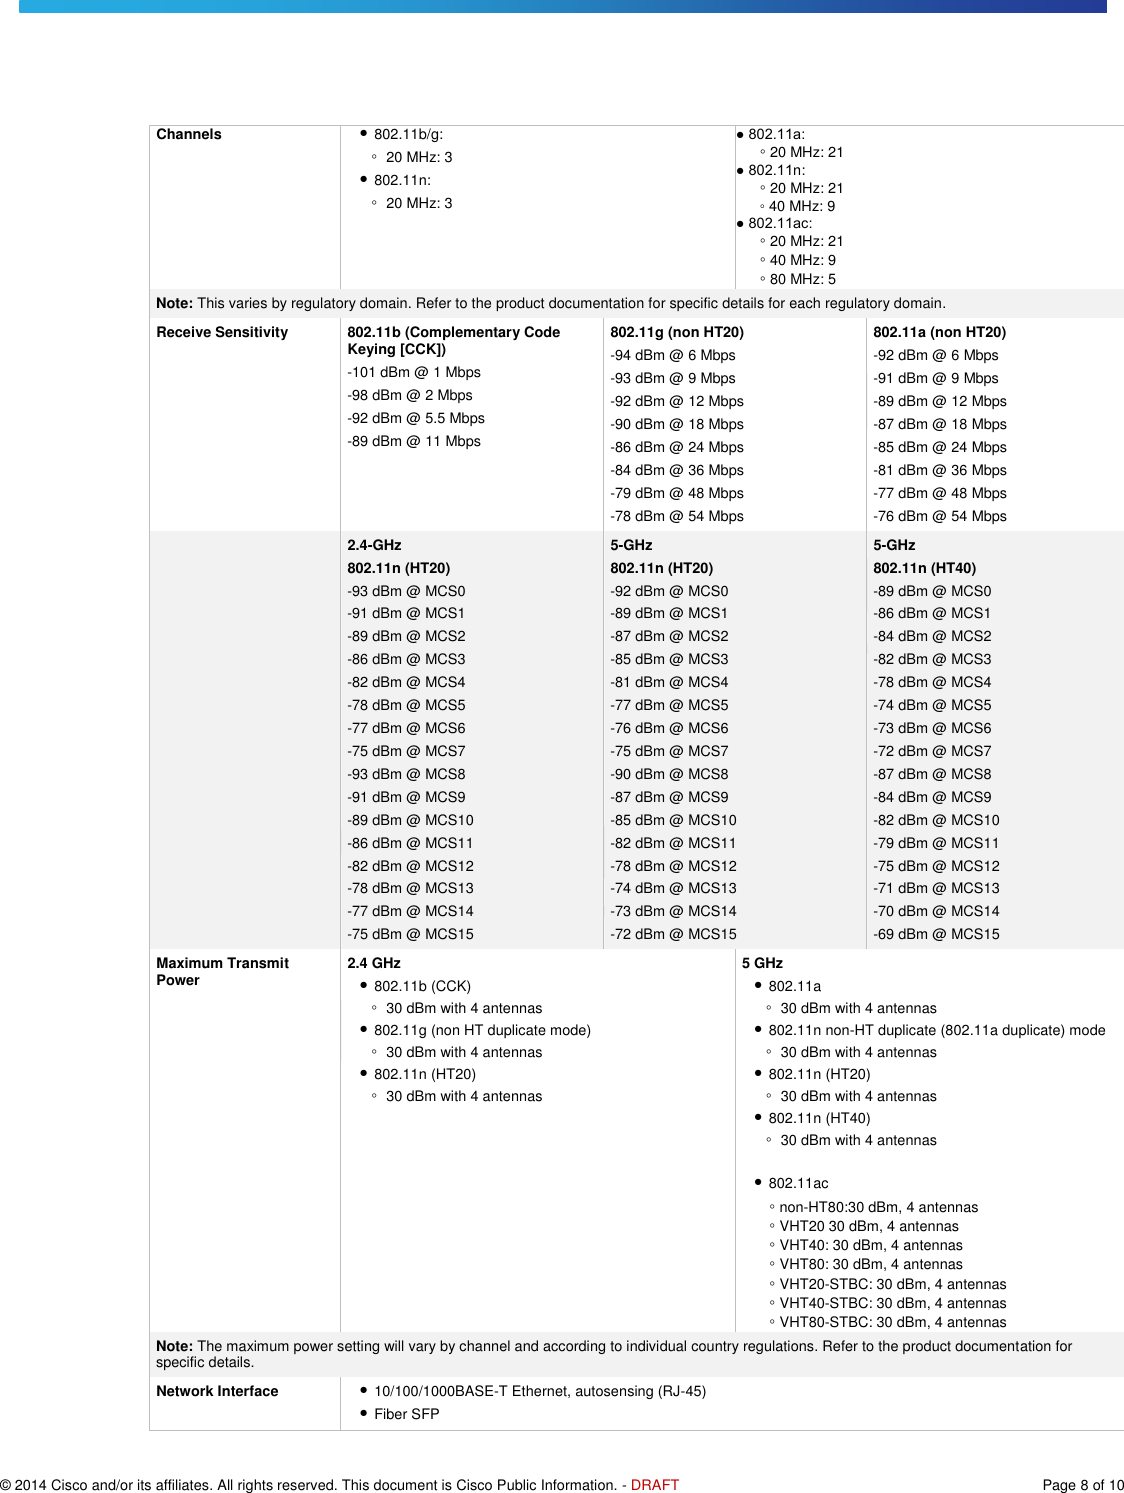   © 2014 Cisco and/or its affiliates. All rights reserved. This document is Cisco Public Information. - DRAFT  Page 8 of 10 Channels ● 802.11b/g: ◦ 20 MHz: 3 ● 802.11n: ◦ 20 MHz: 3 ● 802.11a:  ◦ 20 MHz: 21  ● 802.11n:  ◦ 20 MHz: 21  ◦ 40 MHz: 9  ● 802.11ac:  ◦ 20 MHz: 21  ◦ 40 MHz: 9  ◦ 80 MHz: 5  Note: This varies by regulatory domain. Refer to the product documentation for specific details for each regulatory domain. Receive Sensitivity 802.11b (Complementary Code Keying [CCK]) -101 dBm @ 1 Mbps -98 dBm @ 2 Mbps -92 dBm @ 5.5 Mbps -89 dBm @ 11 Mbps 802.11g (non HT20) -94 dBm @ 6 Mbps -93 dBm @ 9 Mbps -92 dBm @ 12 Mbps -90 dBm @ 18 Mbps -86 dBm @ 24 Mbps -84 dBm @ 36 Mbps -79 dBm @ 48 Mbps -78 dBm @ 54 Mbps 802.11a (non HT20) -92 dBm @ 6 Mbps -91 dBm @ 9 Mbps -89 dBm @ 12 Mbps -87 dBm @ 18 Mbps -85 dBm @ 24 Mbps -81 dBm @ 36 Mbps -77 dBm @ 48 Mbps -76 dBm @ 54 Mbps  2.4-GHz 802.11n (HT20) -93 dBm @ MCS0 -91 dBm @ MCS1 -89 dBm @ MCS2 -86 dBm @ MCS3 -82 dBm @ MCS4 -78 dBm @ MCS5 -77 dBm @ MCS6 -75 dBm @ MCS7 -93 dBm @ MCS8 -91 dBm @ MCS9 -89 dBm @ MCS10 -86 dBm @ MCS11 -82 dBm @ MCS12 -78 dBm @ MCS13 -77 dBm @ MCS14 -75 dBm @ MCS15 5-GHz 802.11n (HT20) -92 dBm @ MCS0 -89 dBm @ MCS1 -87 dBm @ MCS2 -85 dBm @ MCS3 -81 dBm @ MCS4 -77 dBm @ MCS5 -76 dBm @ MCS6 -75 dBm @ MCS7 -90 dBm @ MCS8 -87 dBm @ MCS9 -85 dBm @ MCS10 -82 dBm @ MCS11 -78 dBm @ MCS12 -74 dBm @ MCS13 -73 dBm @ MCS14 -72 dBm @ MCS15 5-GHz 802.11n (HT40) -89 dBm @ MCS0 -86 dBm @ MCS1 -84 dBm @ MCS2 -82 dBm @ MCS3 -78 dBm @ MCS4 -74 dBm @ MCS5 -73 dBm @ MCS6 -72 dBm @ MCS7 -87 dBm @ MCS8 -84 dBm @ MCS9 -82 dBm @ MCS10 -79 dBm @ MCS11 -75 dBm @ MCS12 -71 dBm @ MCS13 -70 dBm @ MCS14 -69 dBm @ MCS15 Maximum Transmit Power 2.4 GHz ● 802.11b (CCK) ◦ 30 dBm with 4 antennas ● 802.11g (non HT duplicate mode) ◦ 30 dBm with 4 antennas ● 802.11n (HT20) ◦ 30 dBm with 4 antennas 5 GHz ● 802.11a ◦ 30 dBm with 4 antennas ● 802.11n non-HT duplicate (802.11a duplicate) mode ◦ 30 dBm with 4 antennas ● 802.11n (HT20) ◦ 30 dBm with 4 antennas ● 802.11n (HT40) ◦ 30 dBm with 4 antennas  ● 802.11ac  ◦ non-HT80:30 dBm, 4 antennas  ◦ VHT20 30 dBm, 4 antennas  ◦ VHT40: 30 dBm, 4 antennas  ◦ VHT80: 30 dBm, 4 antennas  ◦ VHT20-STBC: 30 dBm, 4 antennas  ◦ VHT40-STBC: 30 dBm, 4 antennas  ◦ VHT80-STBC: 30 dBm, 4 antennas  Note: The maximum power setting will vary by channel and according to individual country regulations. Refer to the product documentation for specific details. Network Interface ● 10/100/1000BASE-T Ethernet, autosensing (RJ-45) ● Fiber SFP 